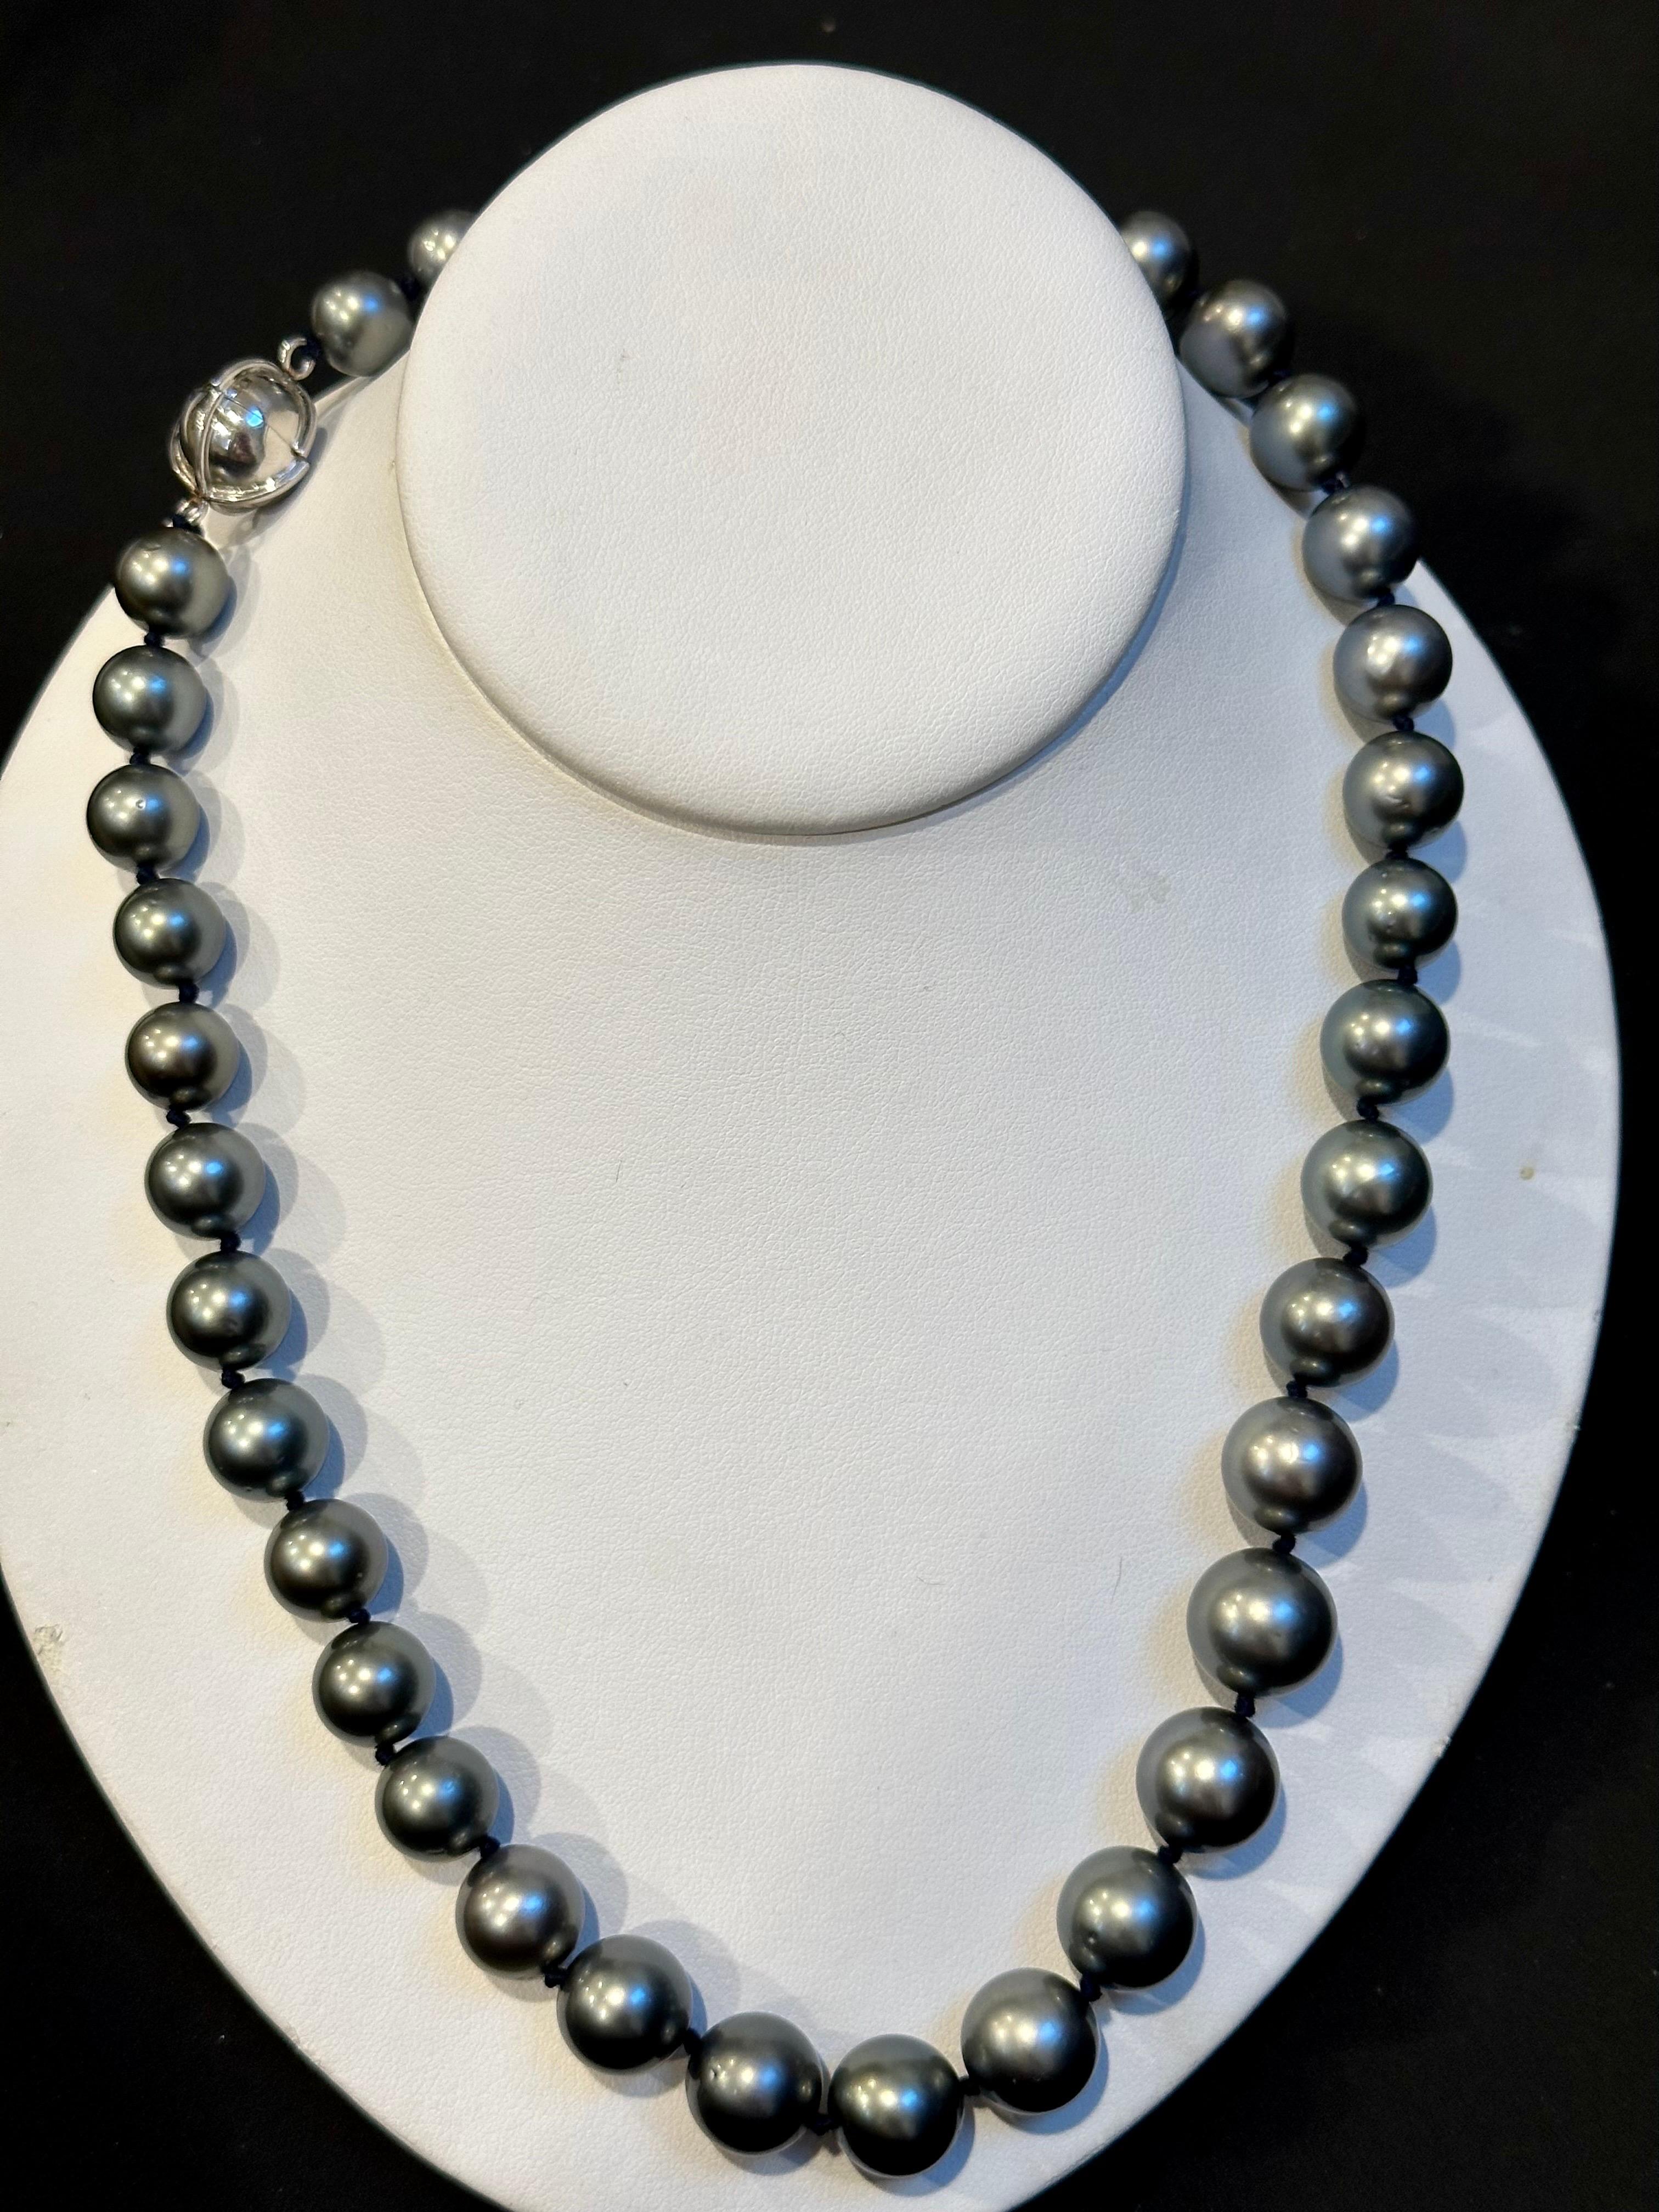 11-15 mm Tahitian Black Graduating Pearls Strand Necklace, Estate, WG For Sale 5